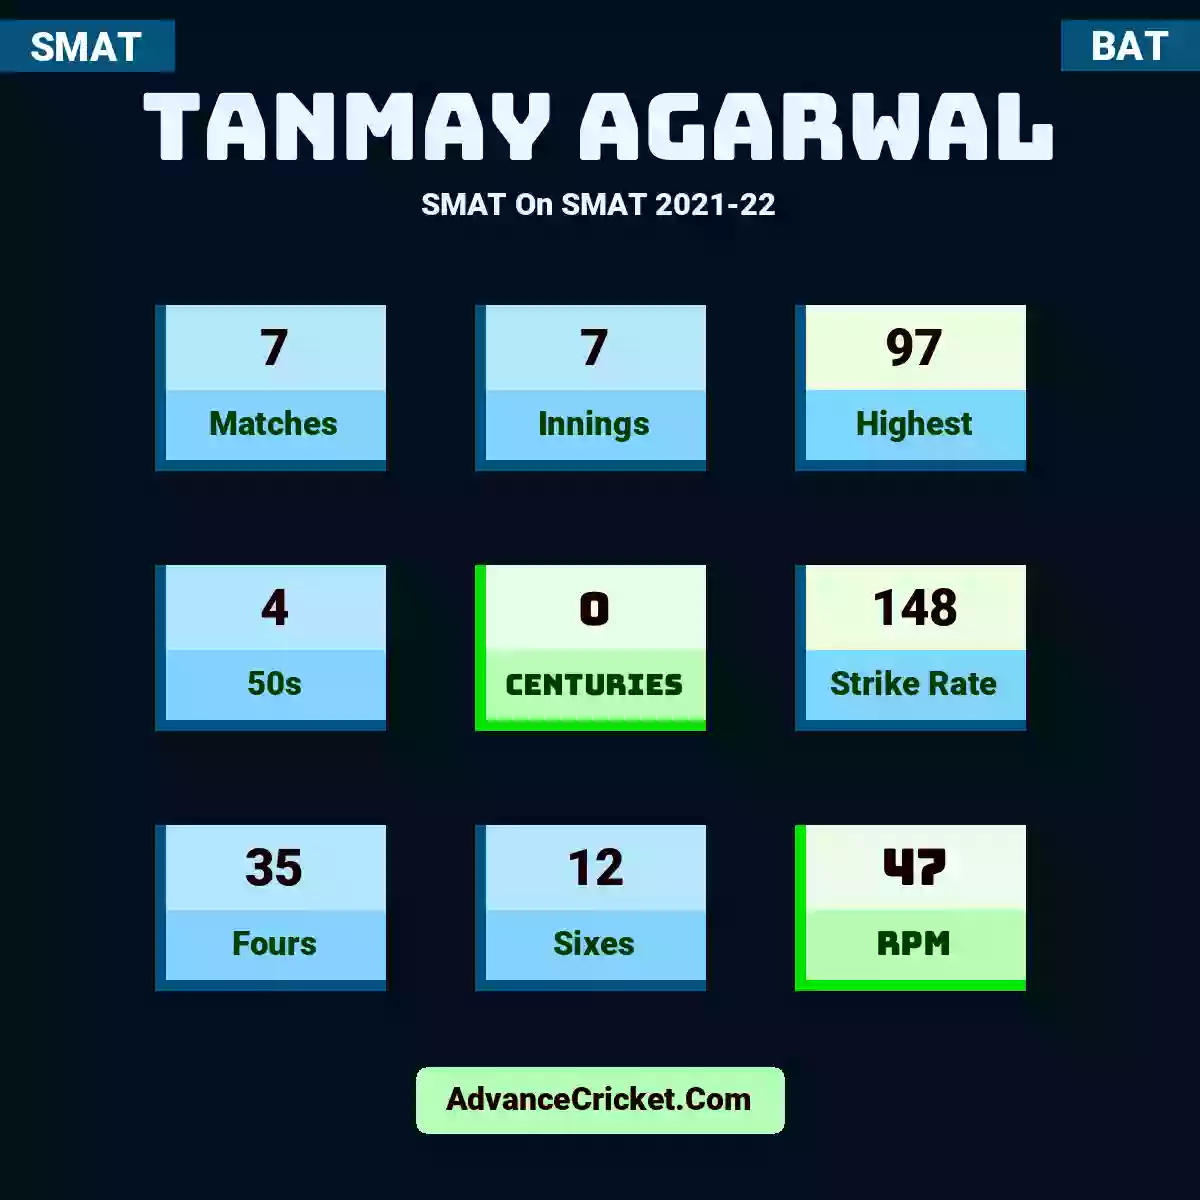 Tanmay Agarwal SMAT  On SMAT 2021-22, Tanmay Agarwal played 7 matches, scored 97 runs as highest, 4 half-centuries, and 0 centuries, with a strike rate of 148. T.Agarwal hit 35 fours and 12 sixes, with an RPM of 47.